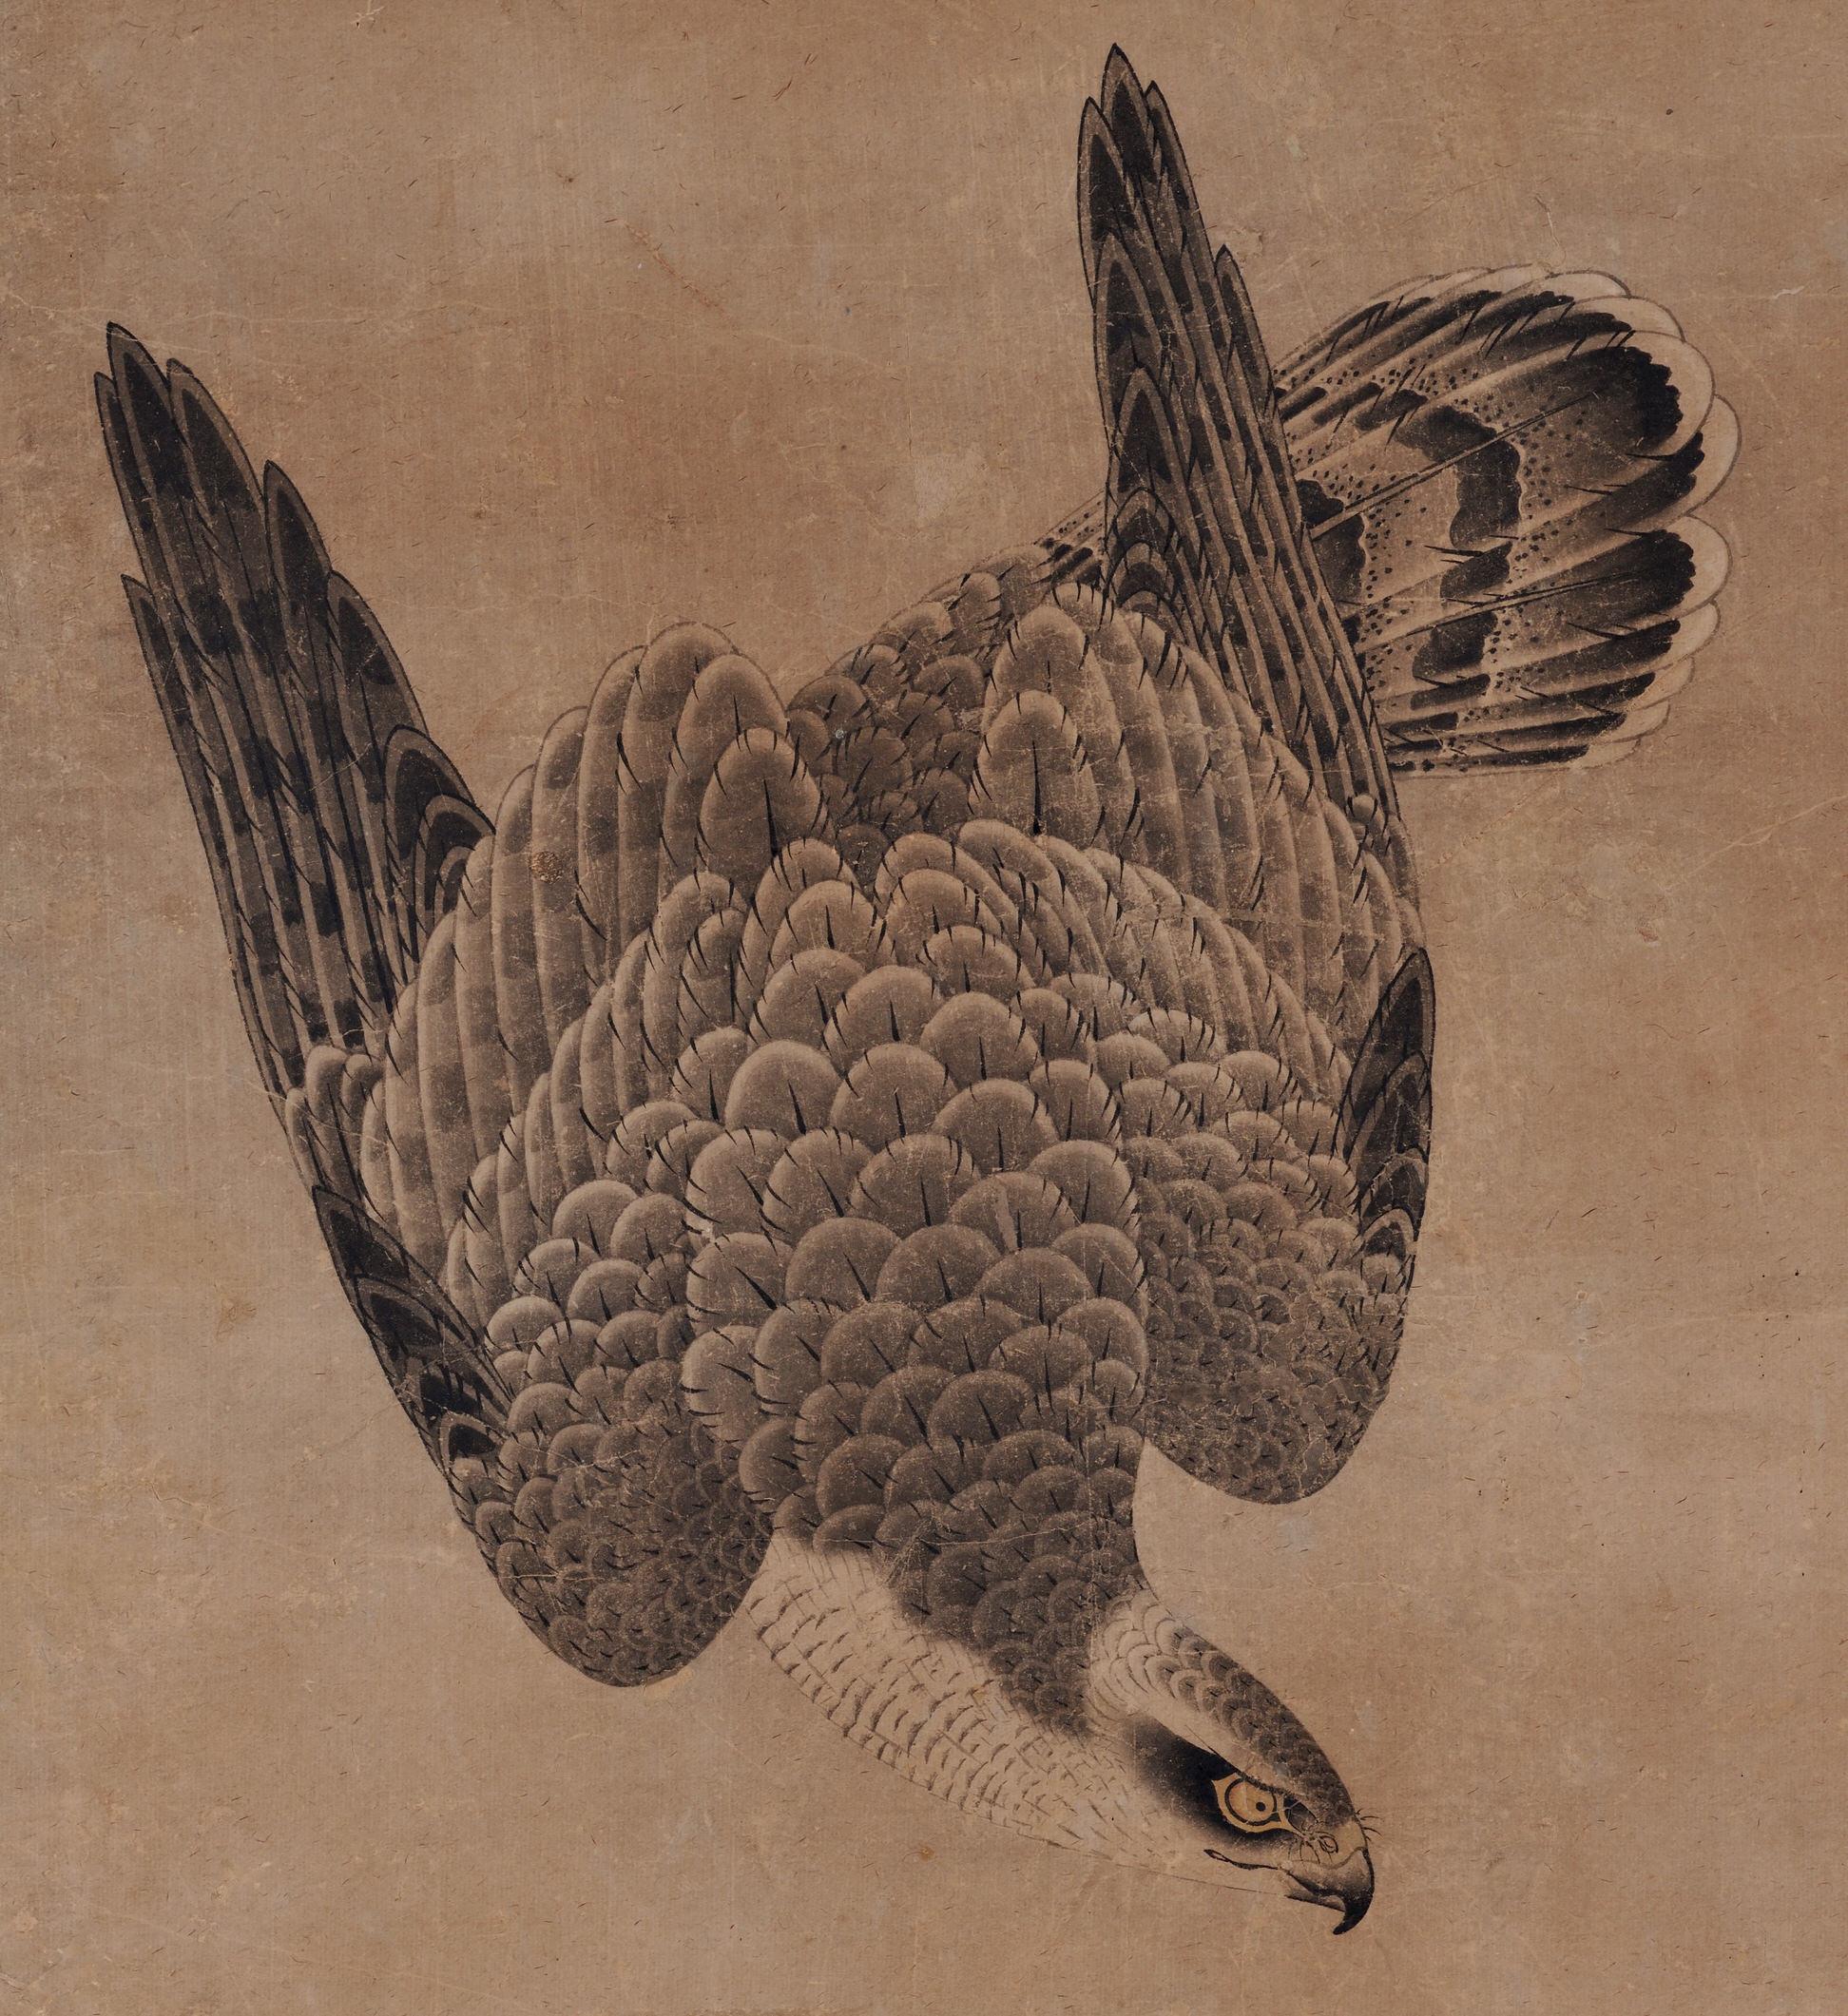 Mitani Toshuku (1577-1654)
“Falcon”
Wall panel, ink and light color on paper.
Upper seal: Mitani
Lower seal: Toshuku
Dimensions:
Each: 118.5 cm x 51 cm x 2 cm (46.5” x 20” x .75”)

Individual falcon paintings by Mitani Toshuku (1577-1654),